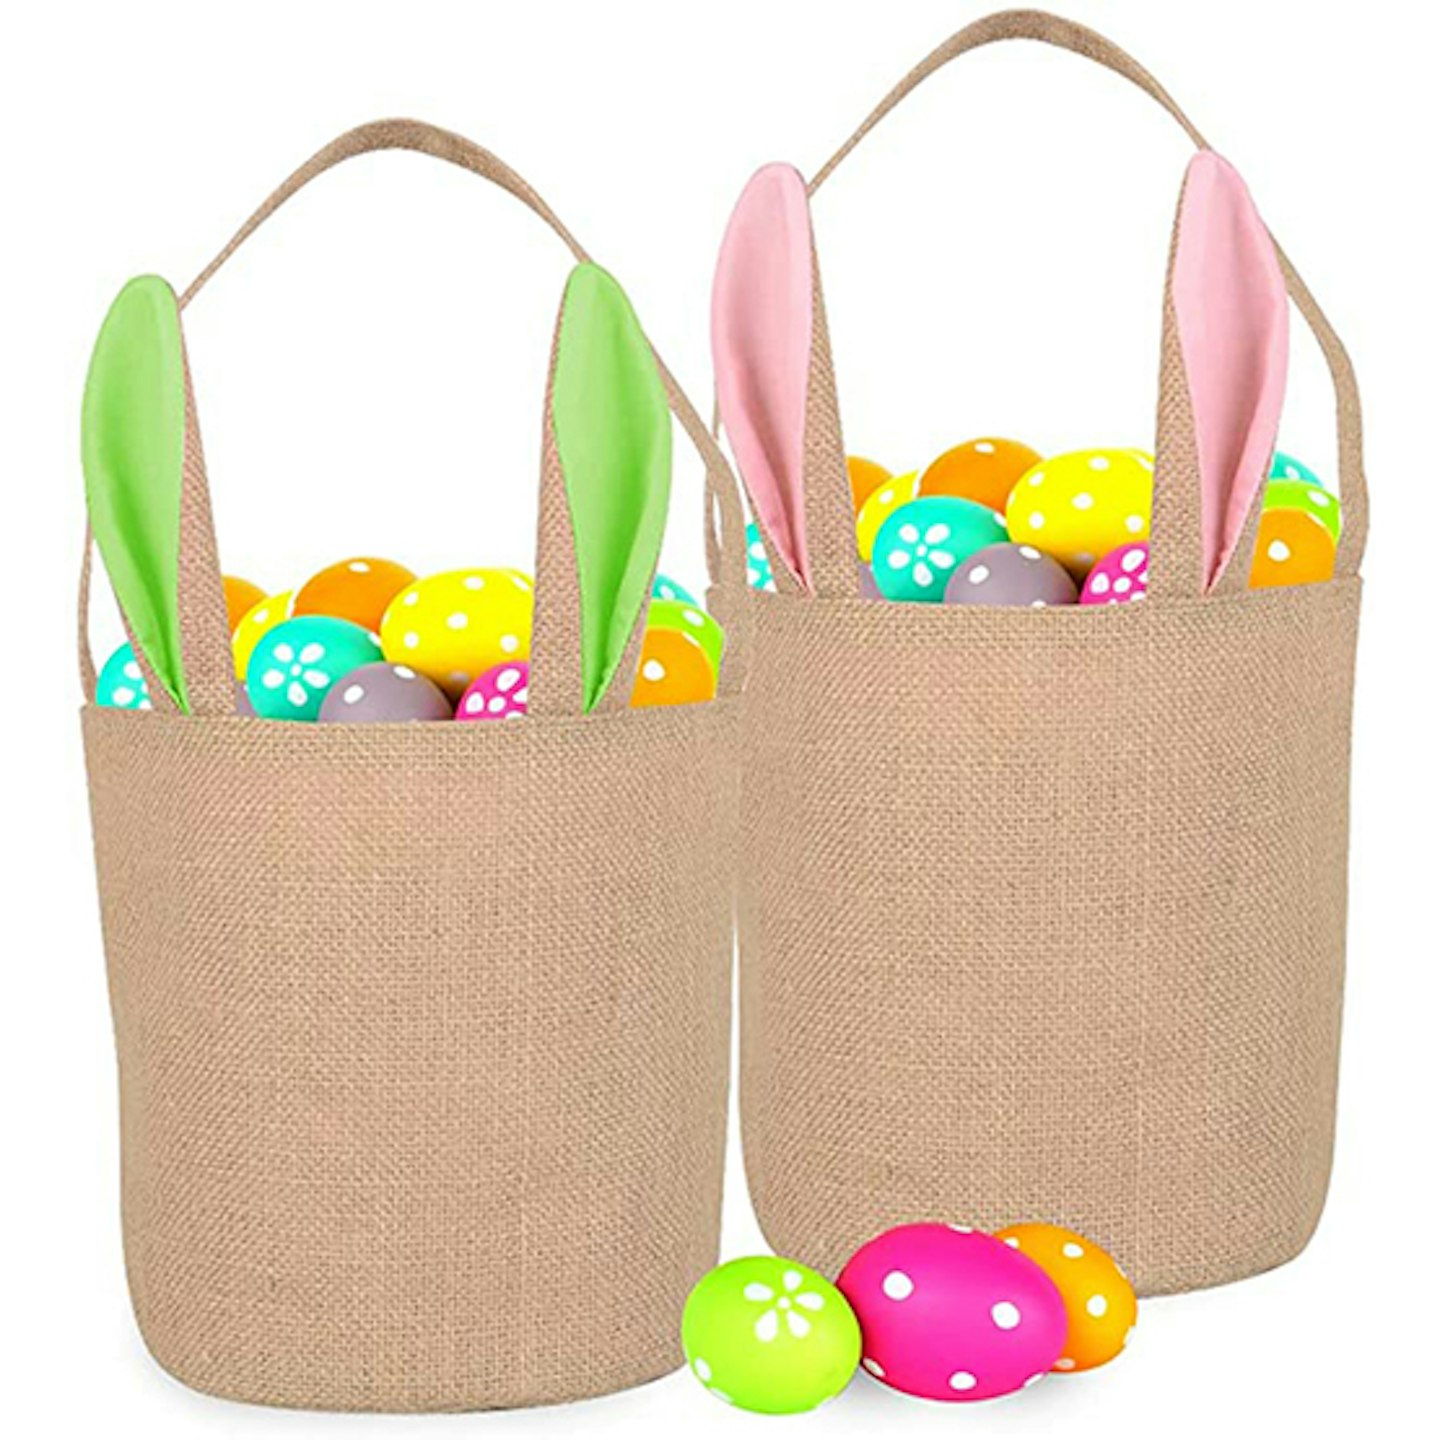 Easter bags